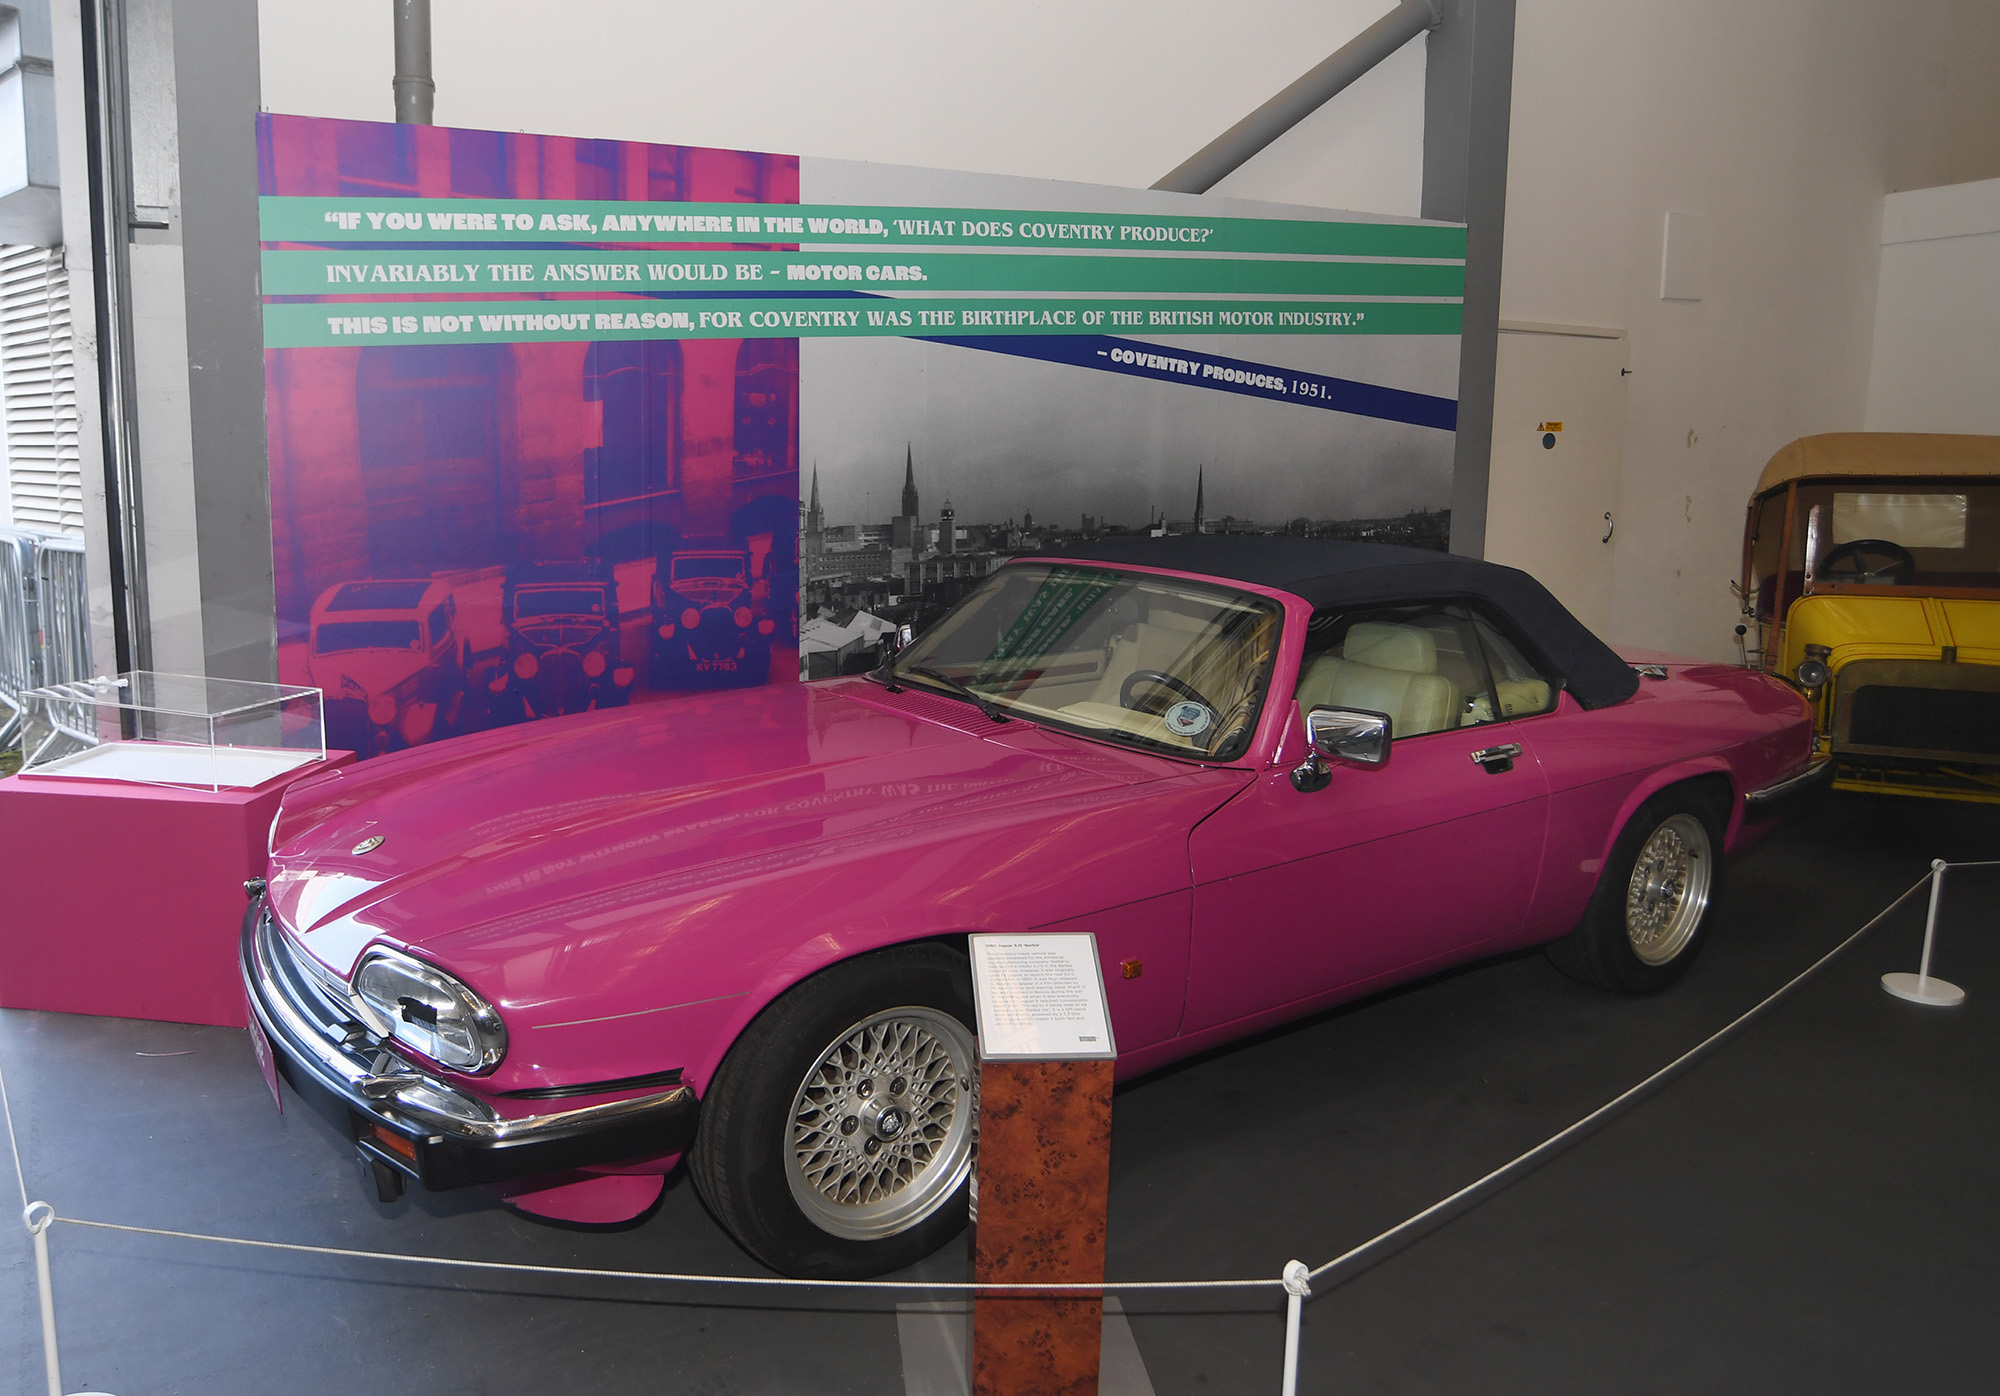 The iconic pink Barbie Jaguar. A display board behind it features archive imagery and a quote from Coventry Produces in 1951, "If you were to ask, anywhere in the world, 'What does Coventry produce?' the answer would invariably be - motor cars. This is not without reason, for Coventry was the birthplace of the British motor industry."